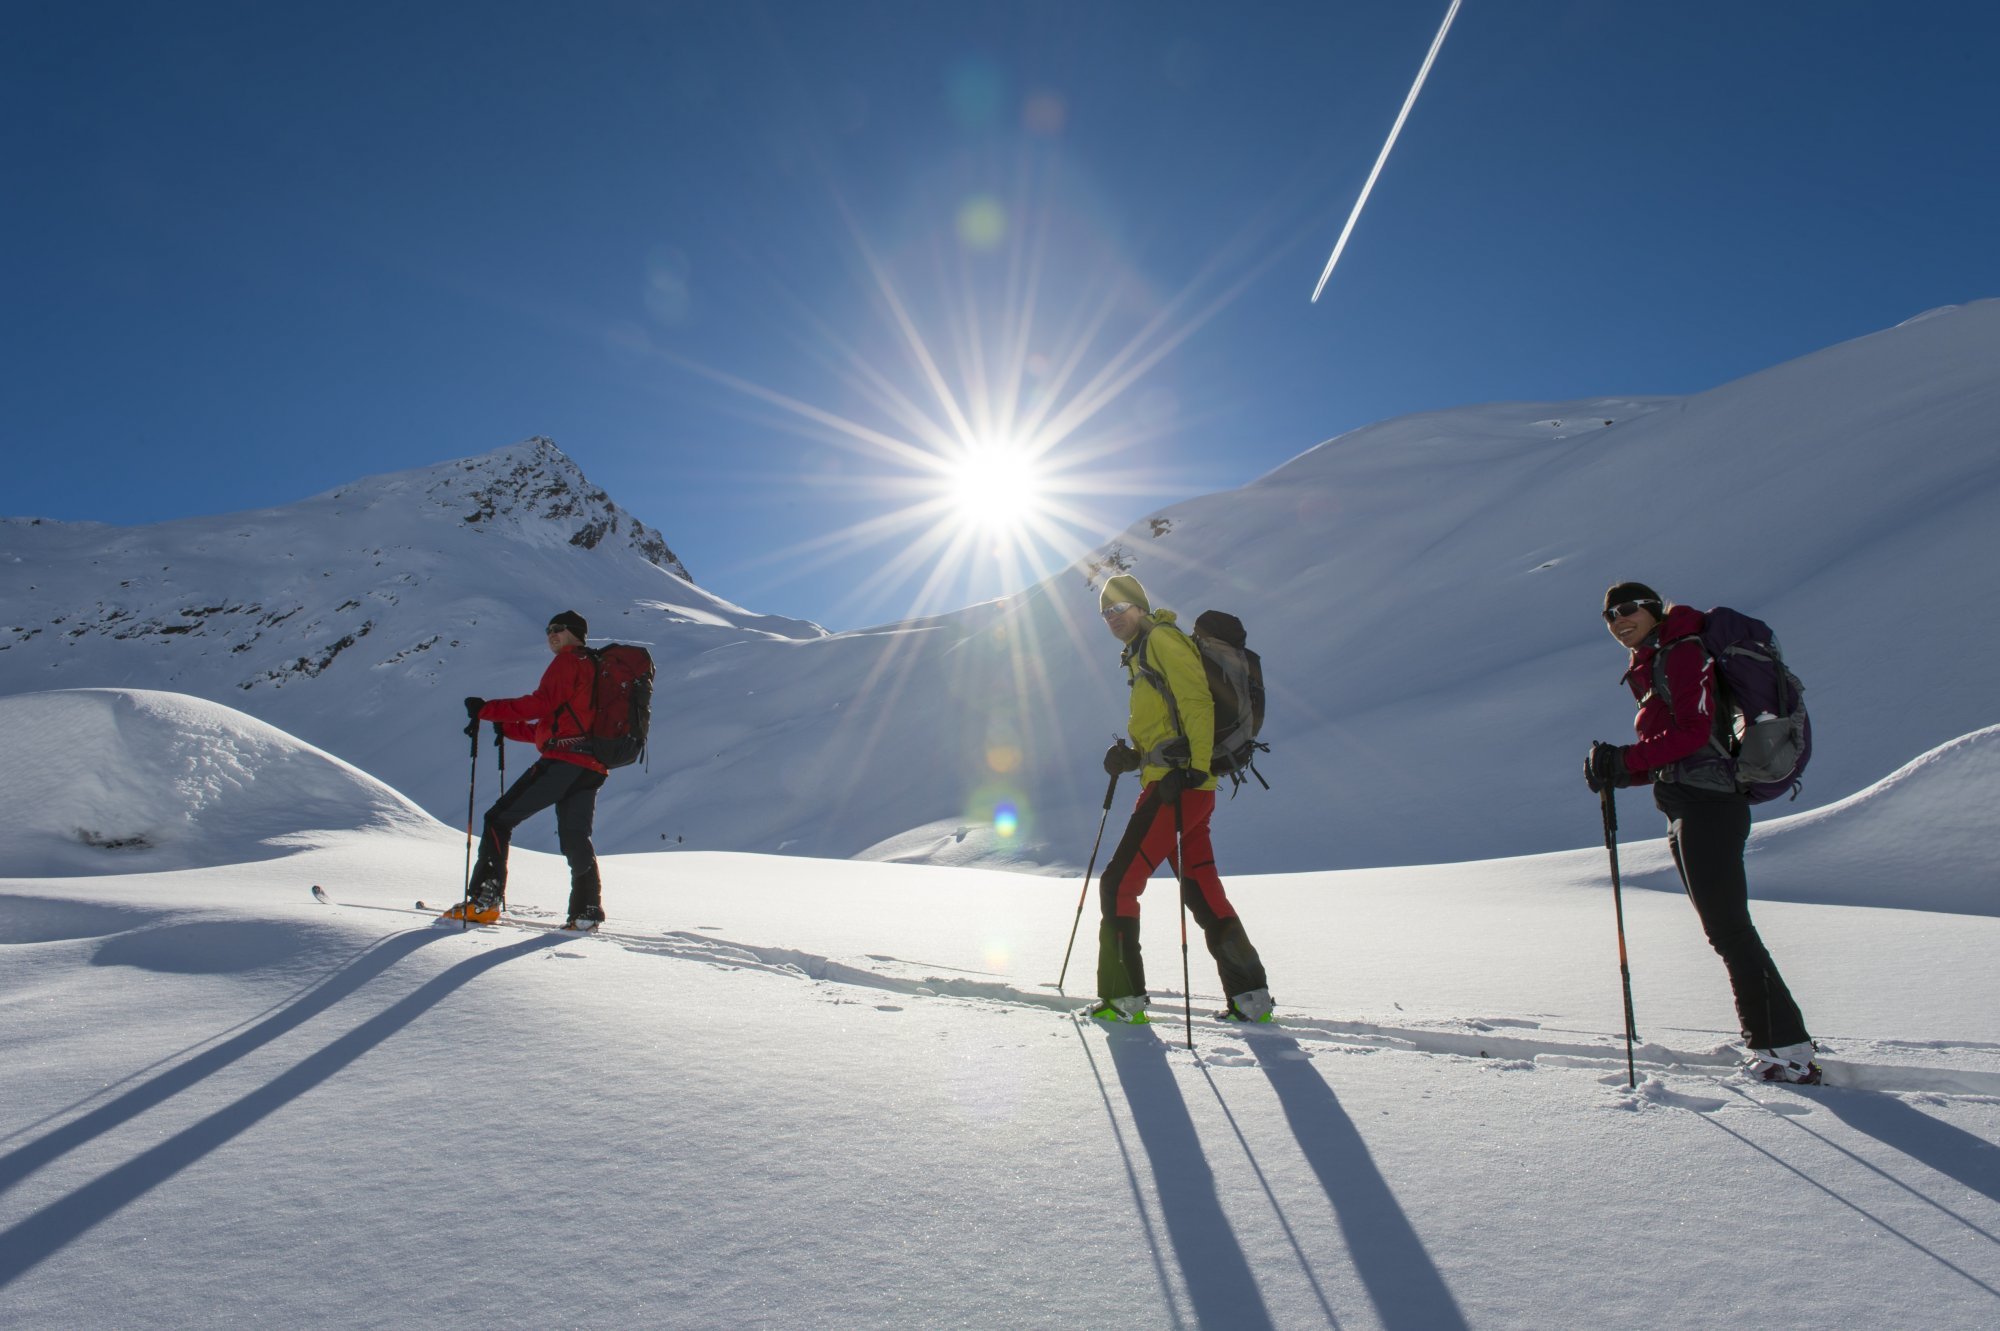 Group of skiers alpine touring in Summit County, Colorado